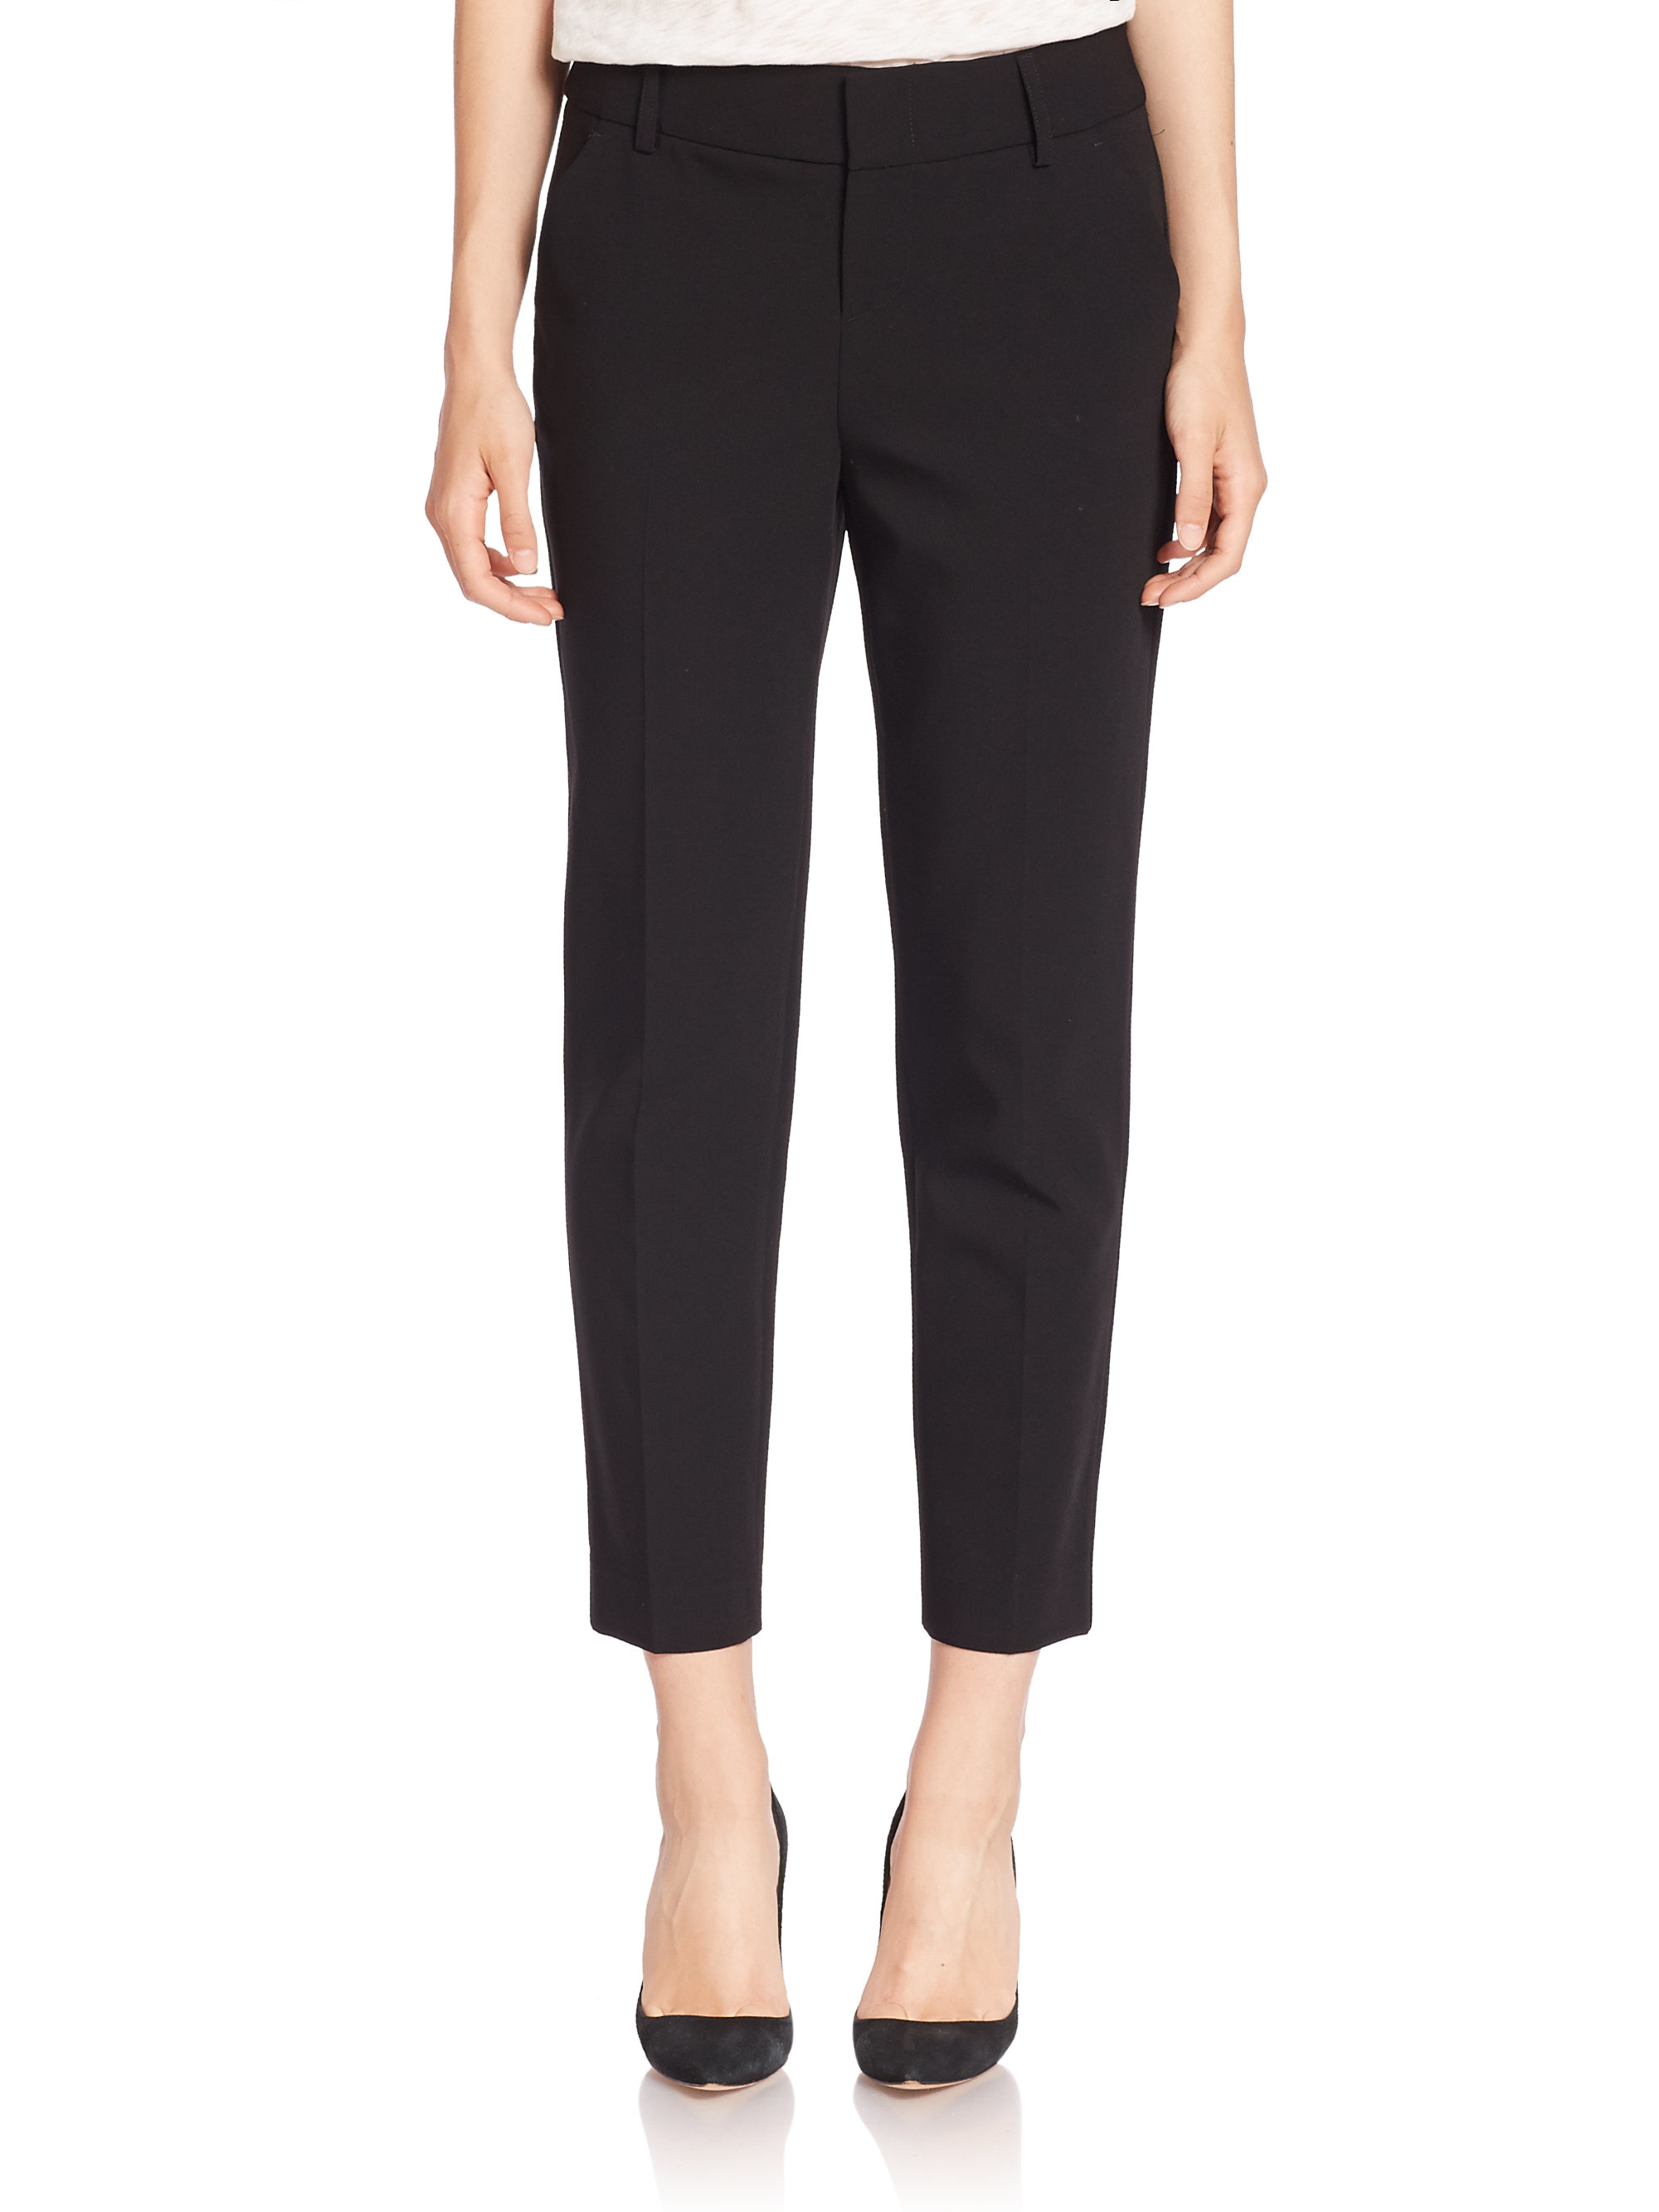 Alice + olivia Stacey Slim Cropped Pants in Black | Lyst